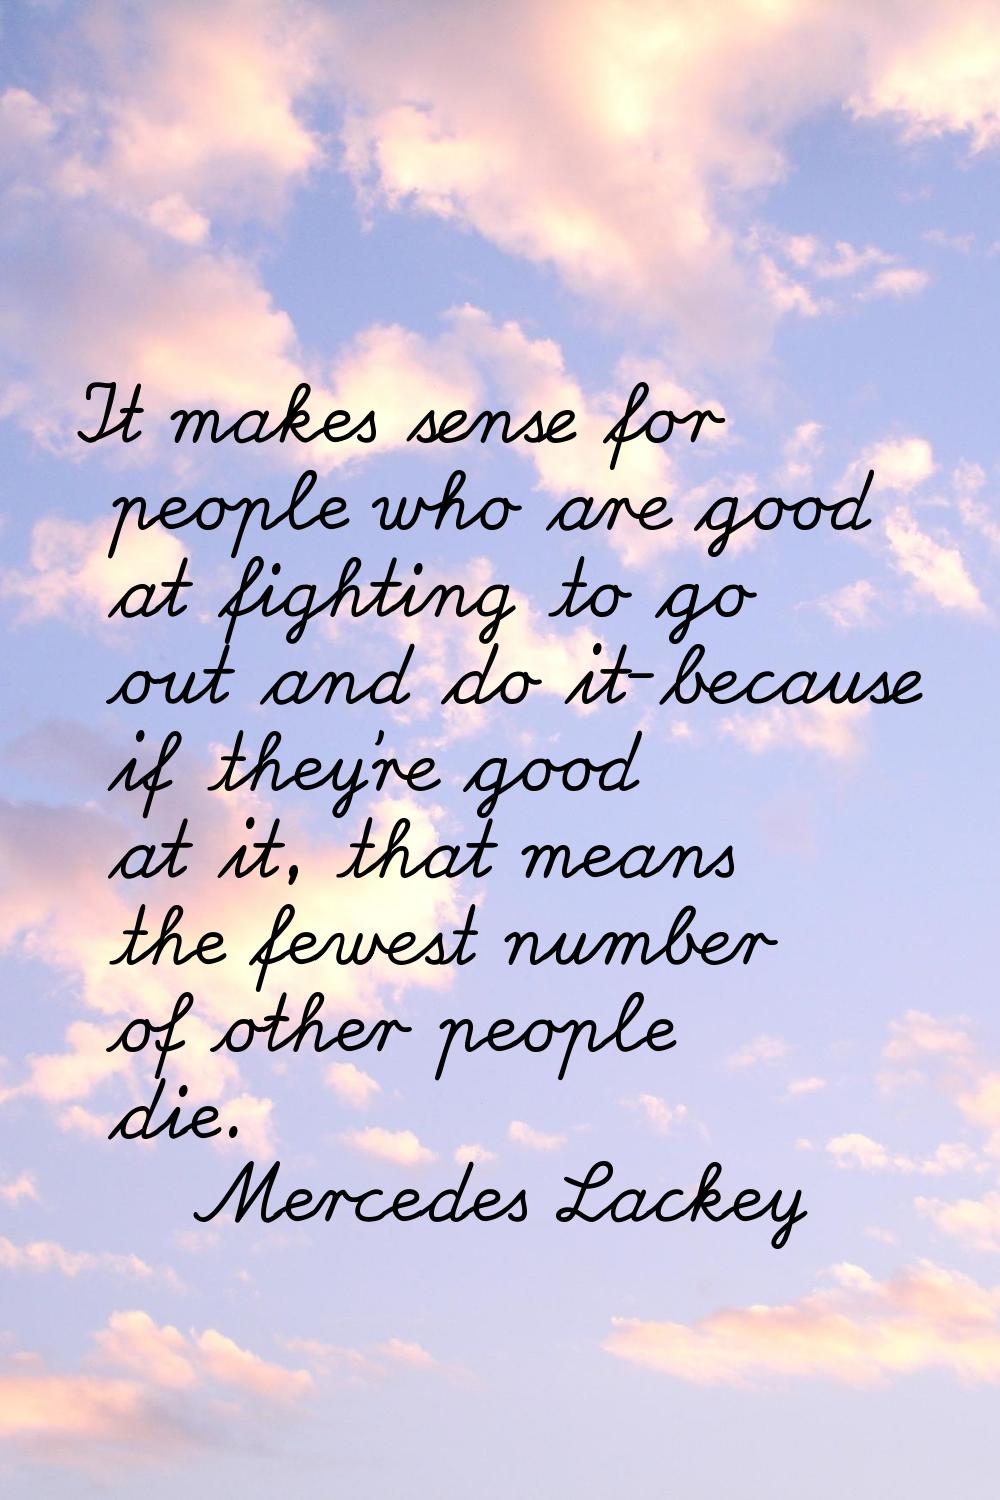 It makes sense for people who are good at fighting to go out and do it-because if they're good at i